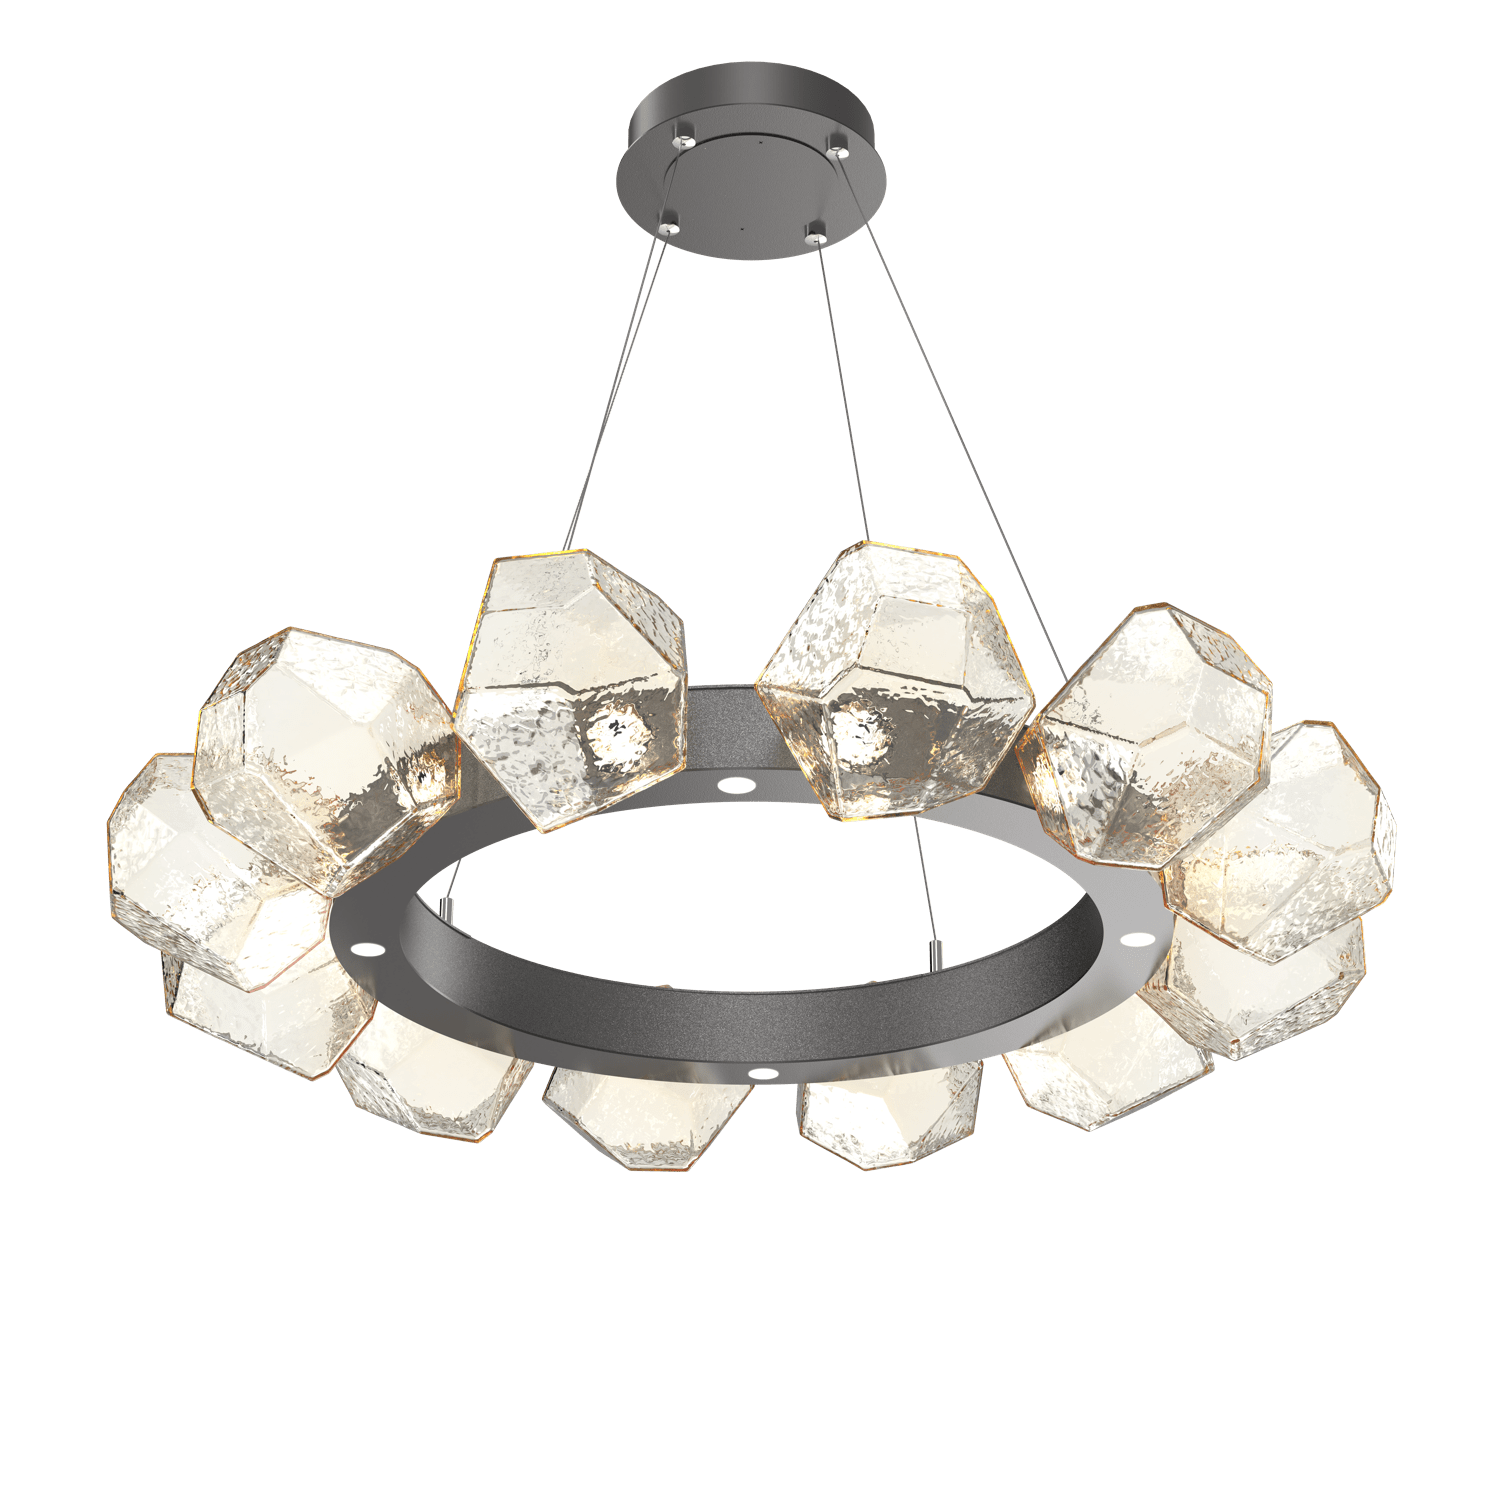 CHB0039-36-GP-A-Hammerton-Studio-Gem-36-inch-radial-ring-chandelier-with-graphite-finish-and-amber-blown-glass-shades-and-LED-lamping